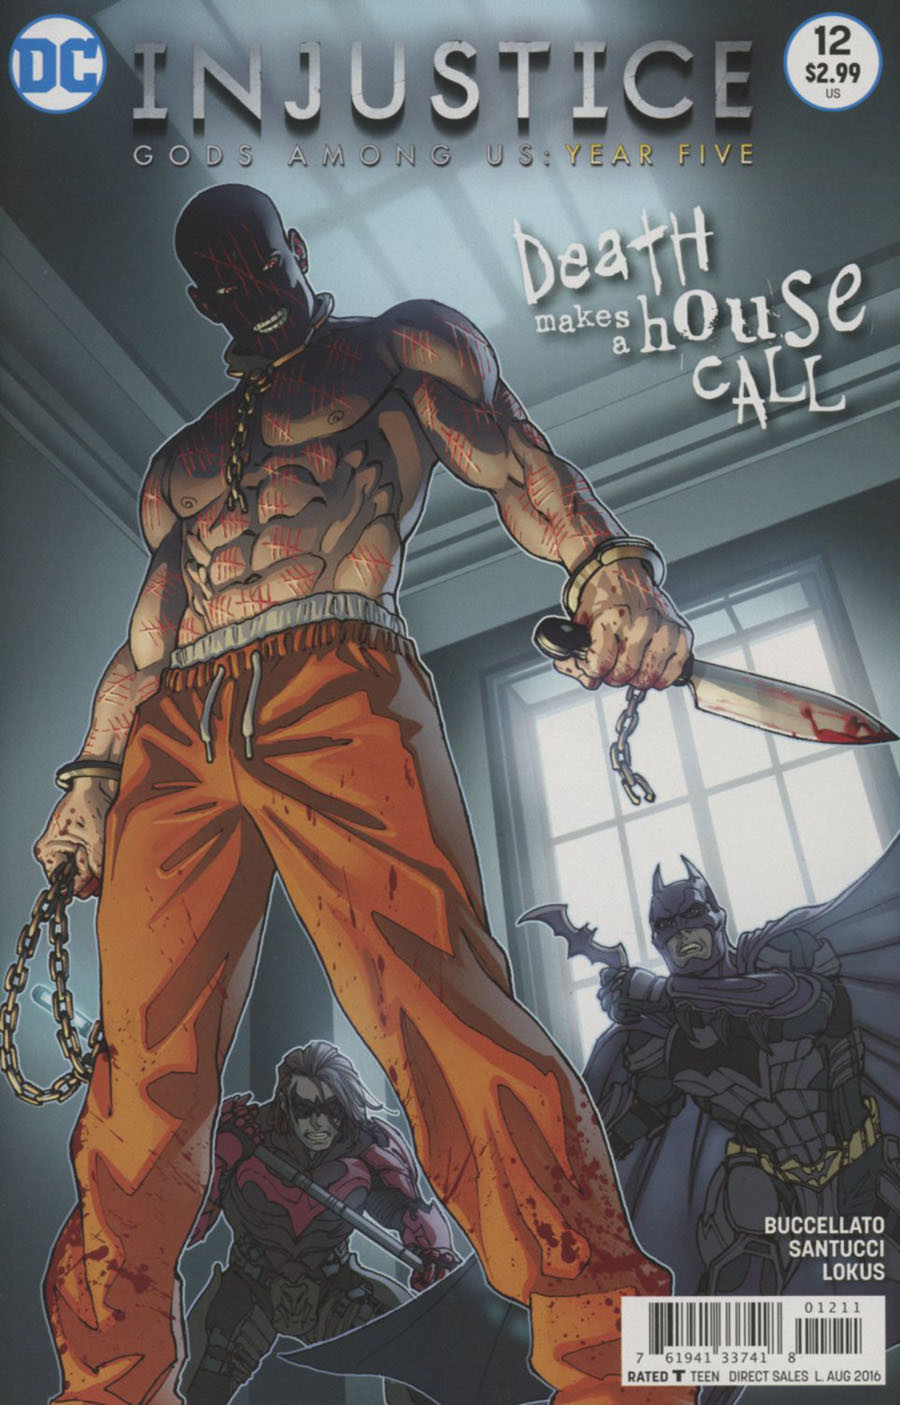 Injustice: Gods Among Us: Year Five Vol. 1 #12